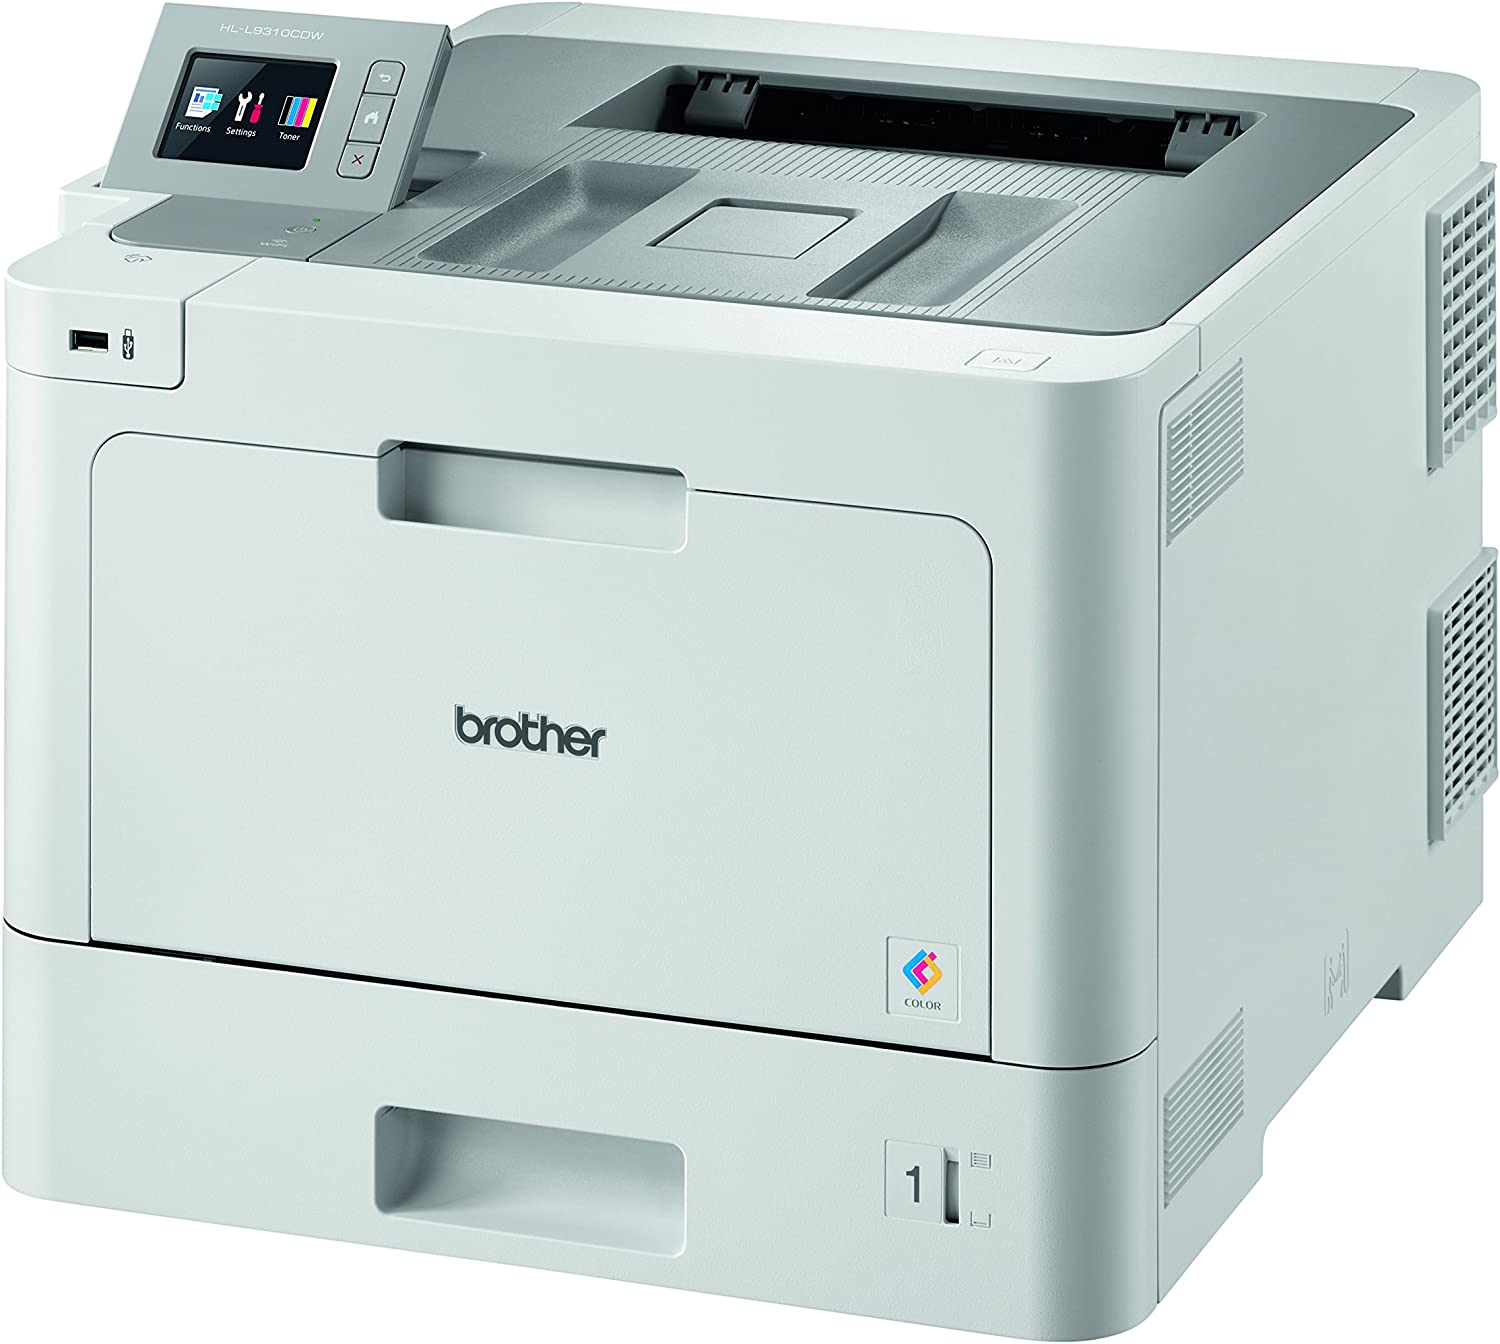 Brother HL-L9310CDW Imprimante laser couleur WiFi recto verso 31 ppm